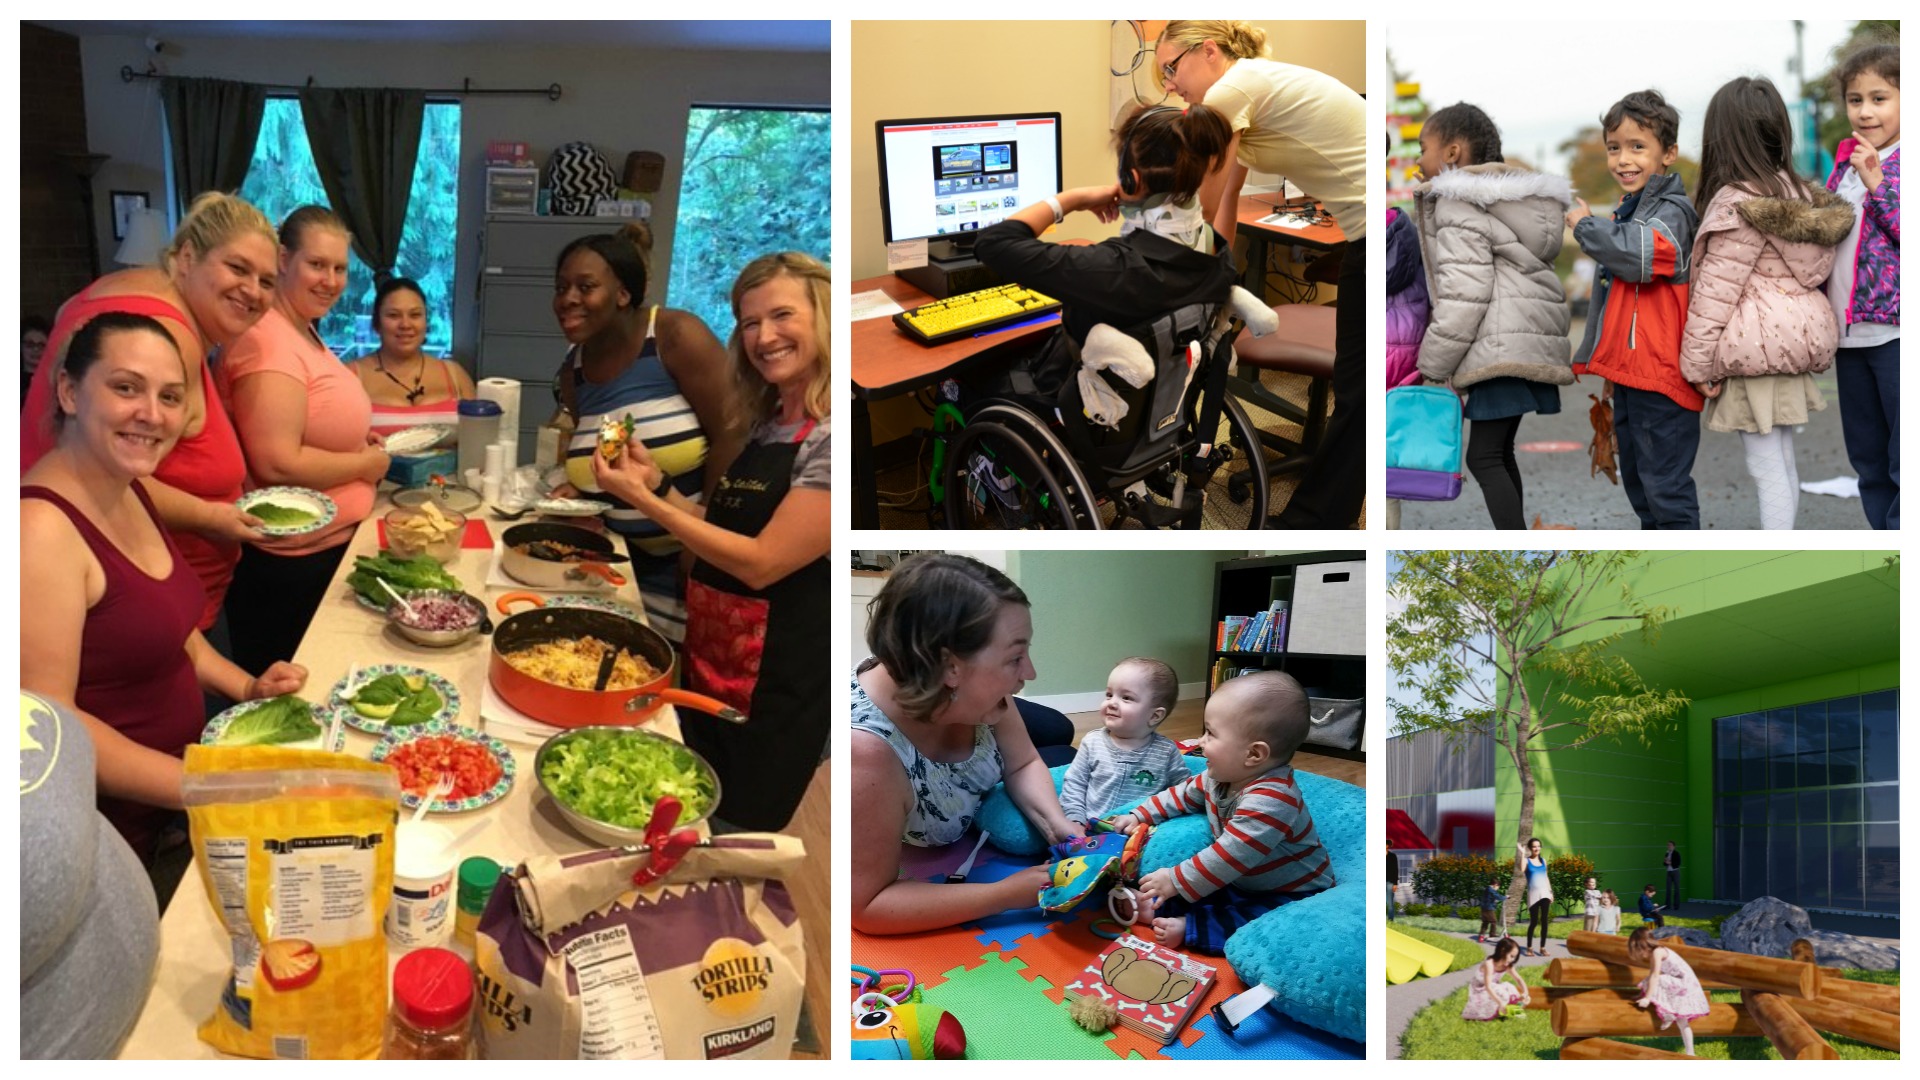 Image 1: a group of people fill their plates with food and smile at the camera. Image 2: a woman wearing a white t-shirt and glasses helps a young child in a wheelchair with something on the computer. Image 3: a young woman makes a happy face at two young babies sitting on blue cushions on a playmat. Image 4: five young children wearing coats line up oustide. Image 5: children play on a wooden log formation outside next to a green building. 